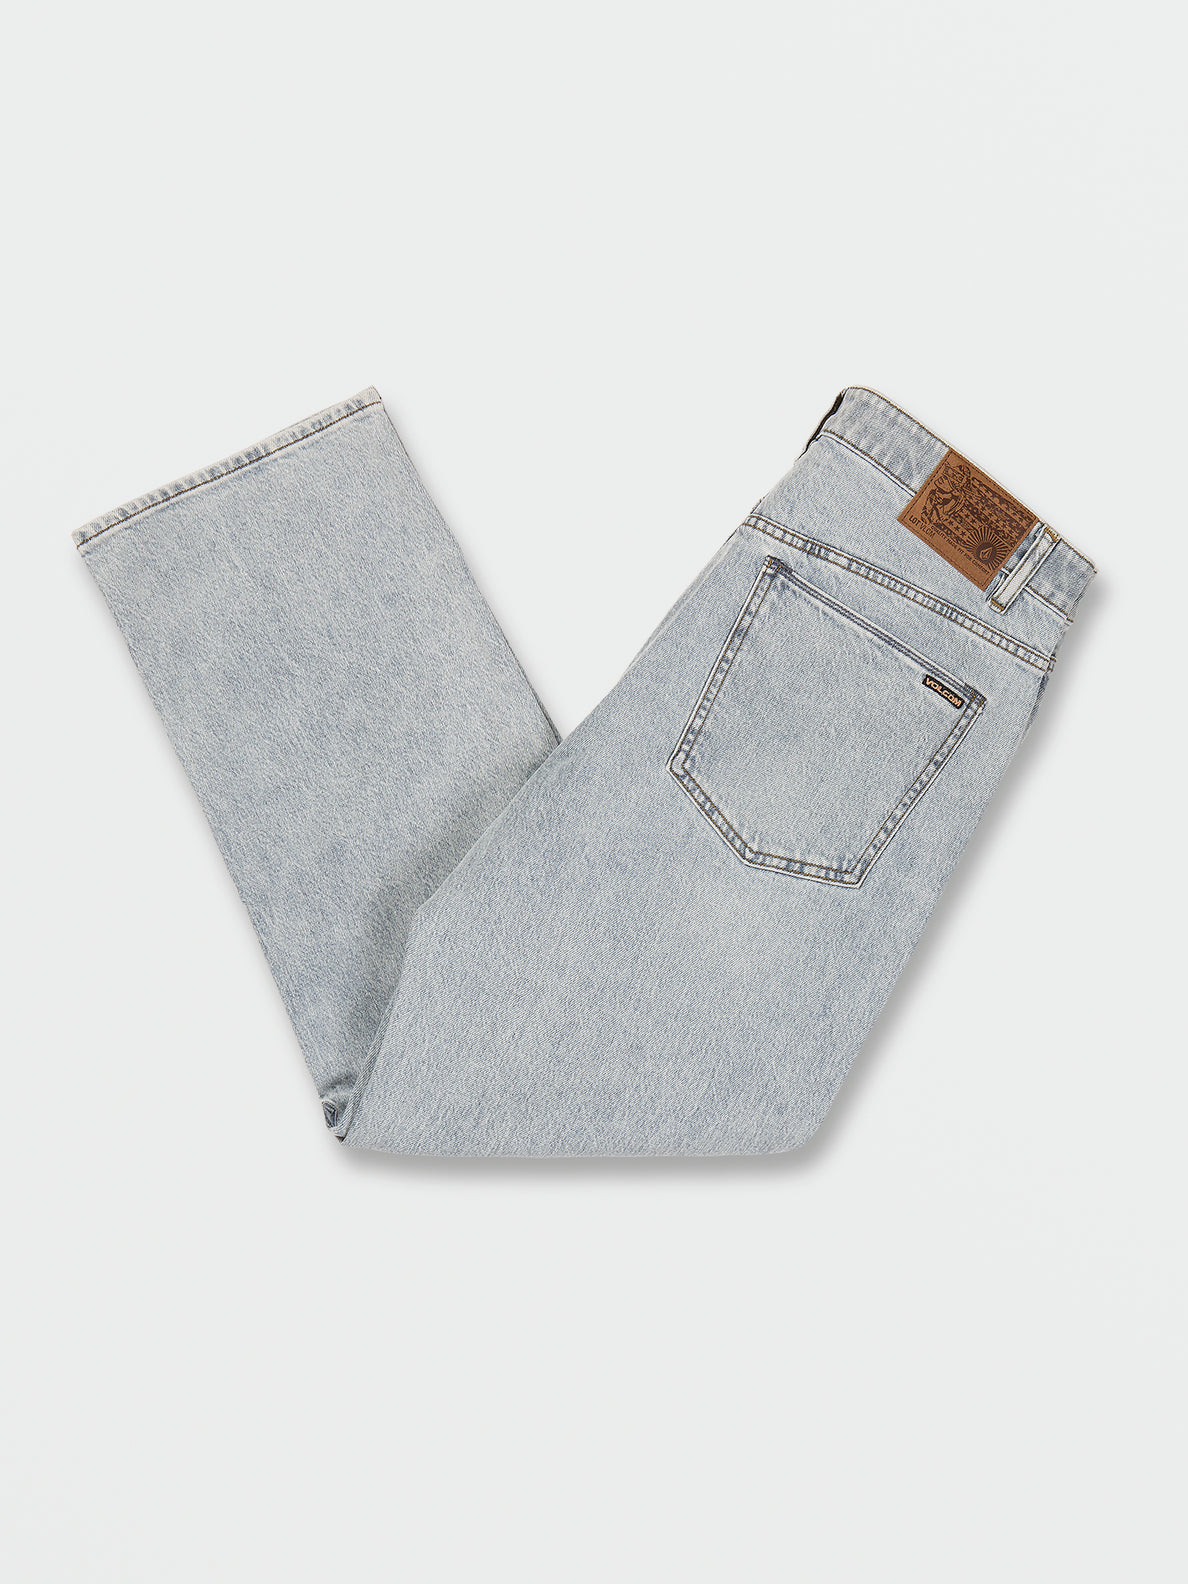 Nailer Relaxed Fit Jeans - Heavy Worn Faded